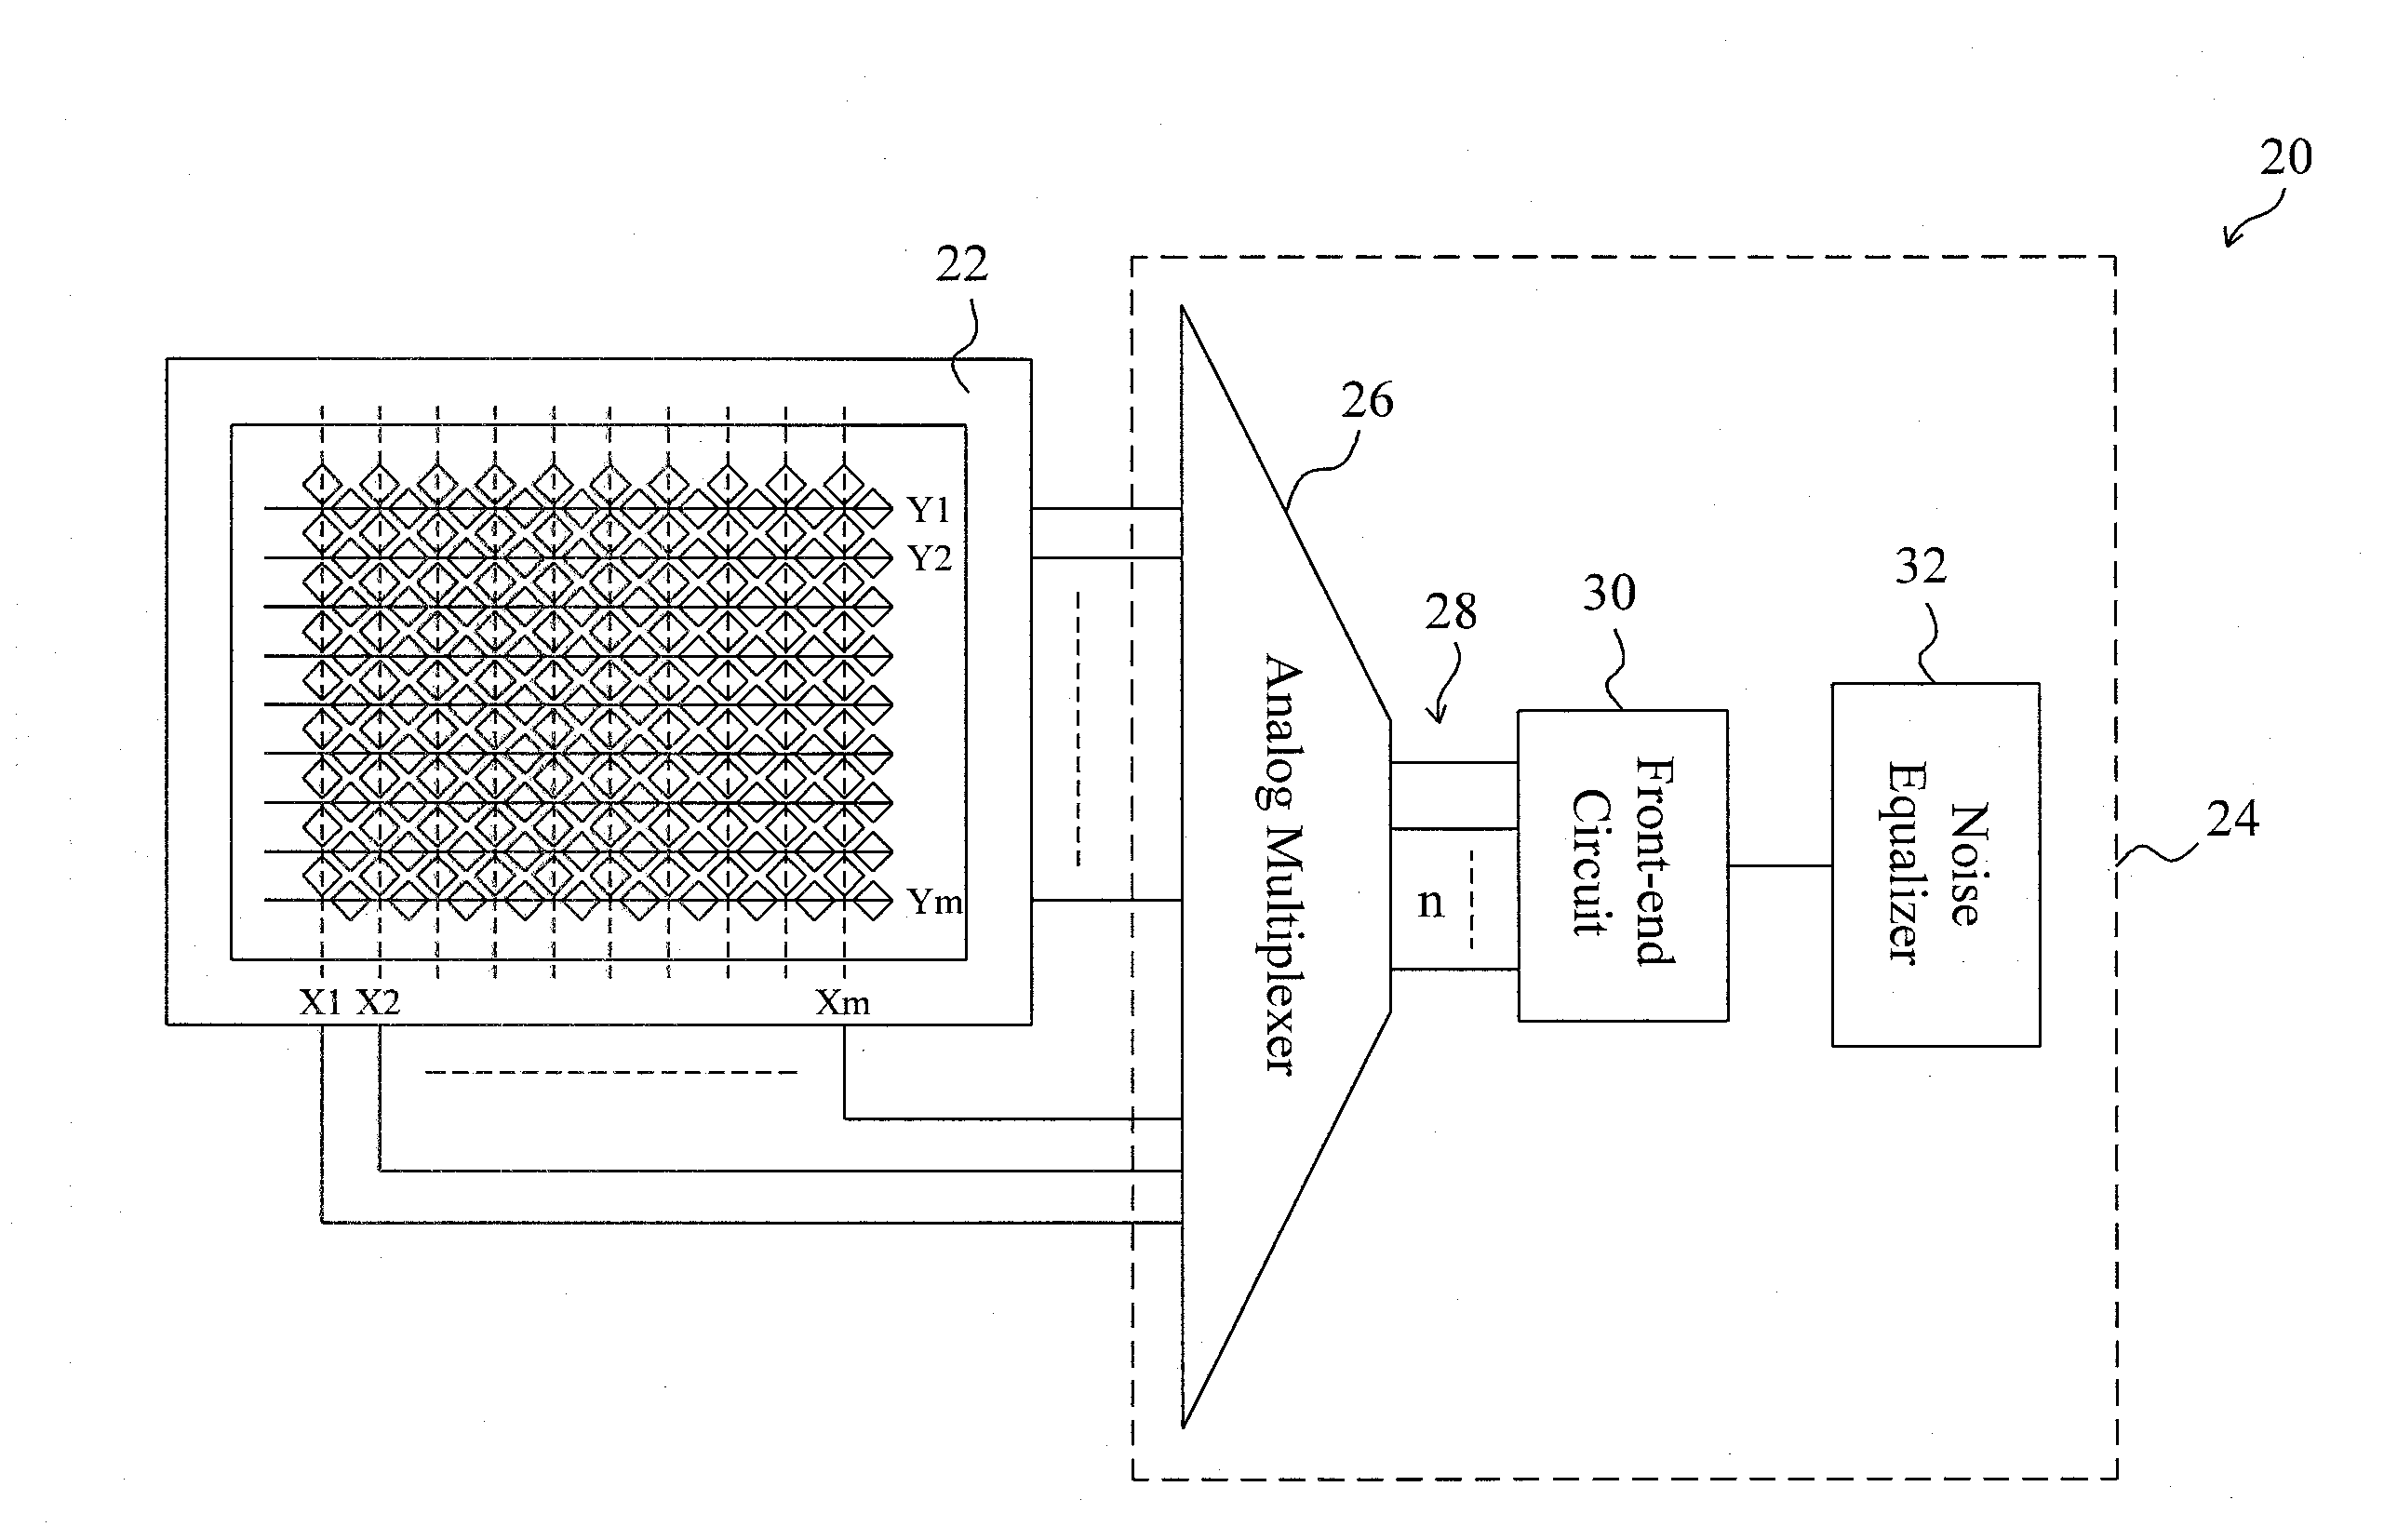 Group scanning circuit and method for a capacitive touch sensor